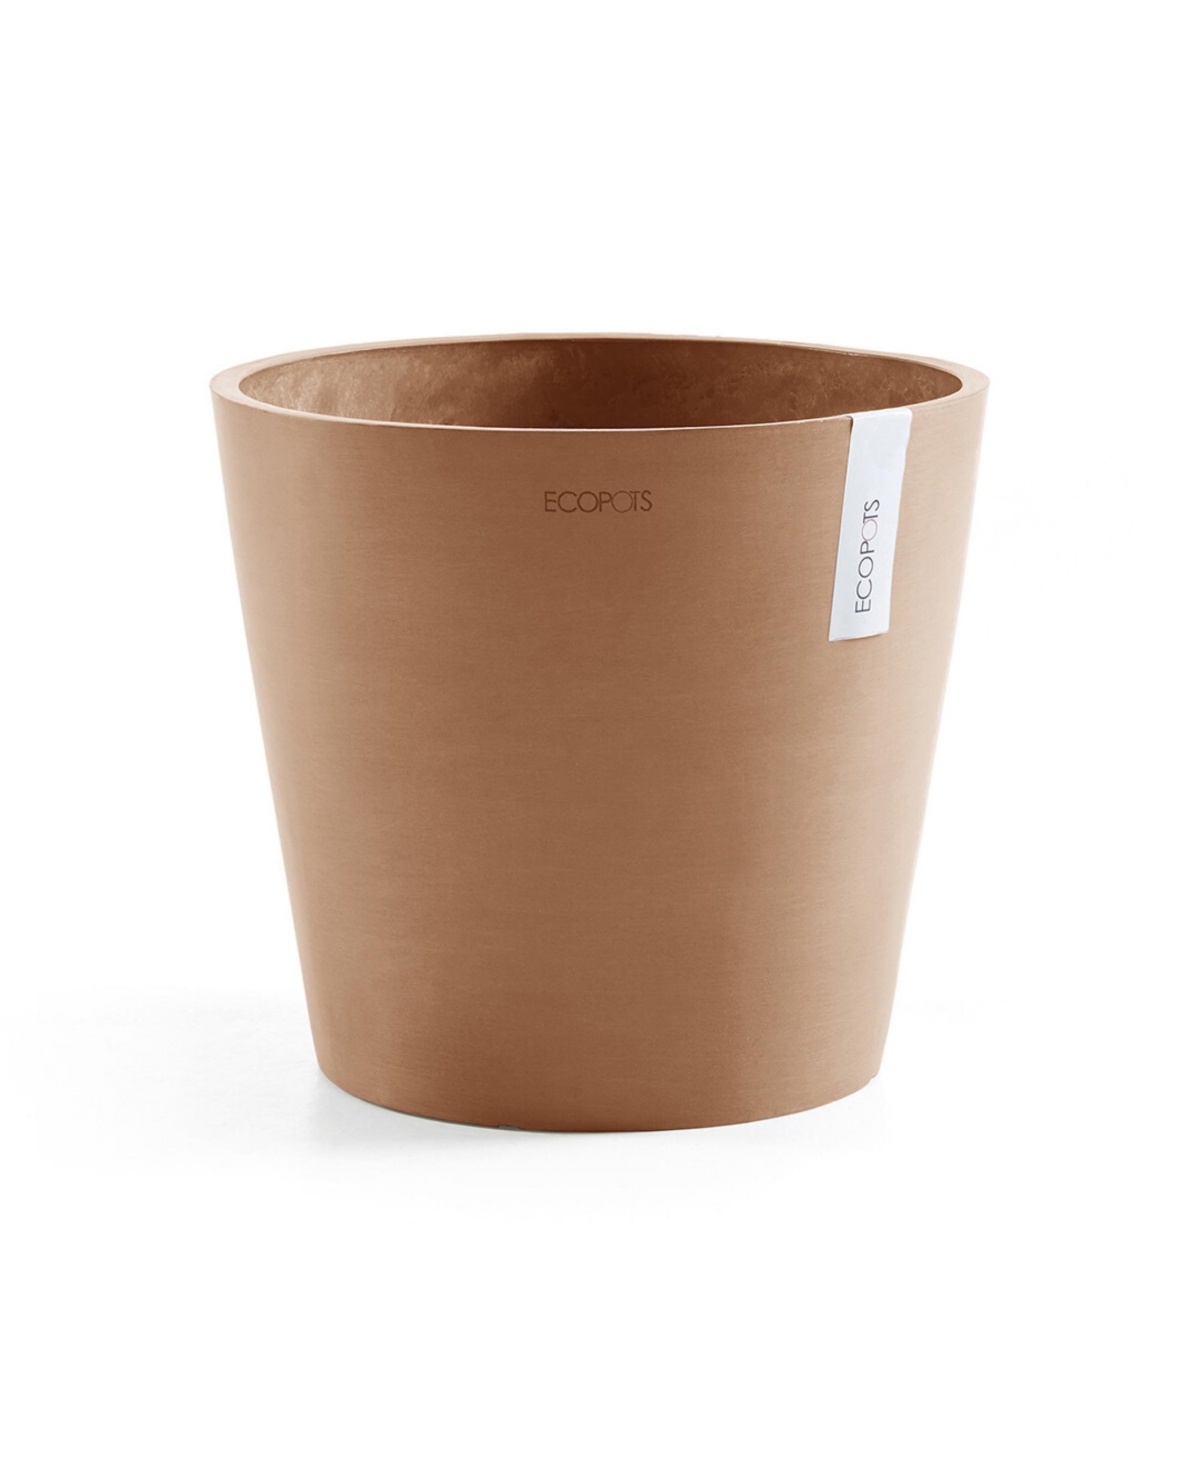 Eco pots Amsterdam Modern Round Indoor and Outdoor Planter, 10in - Terracotta